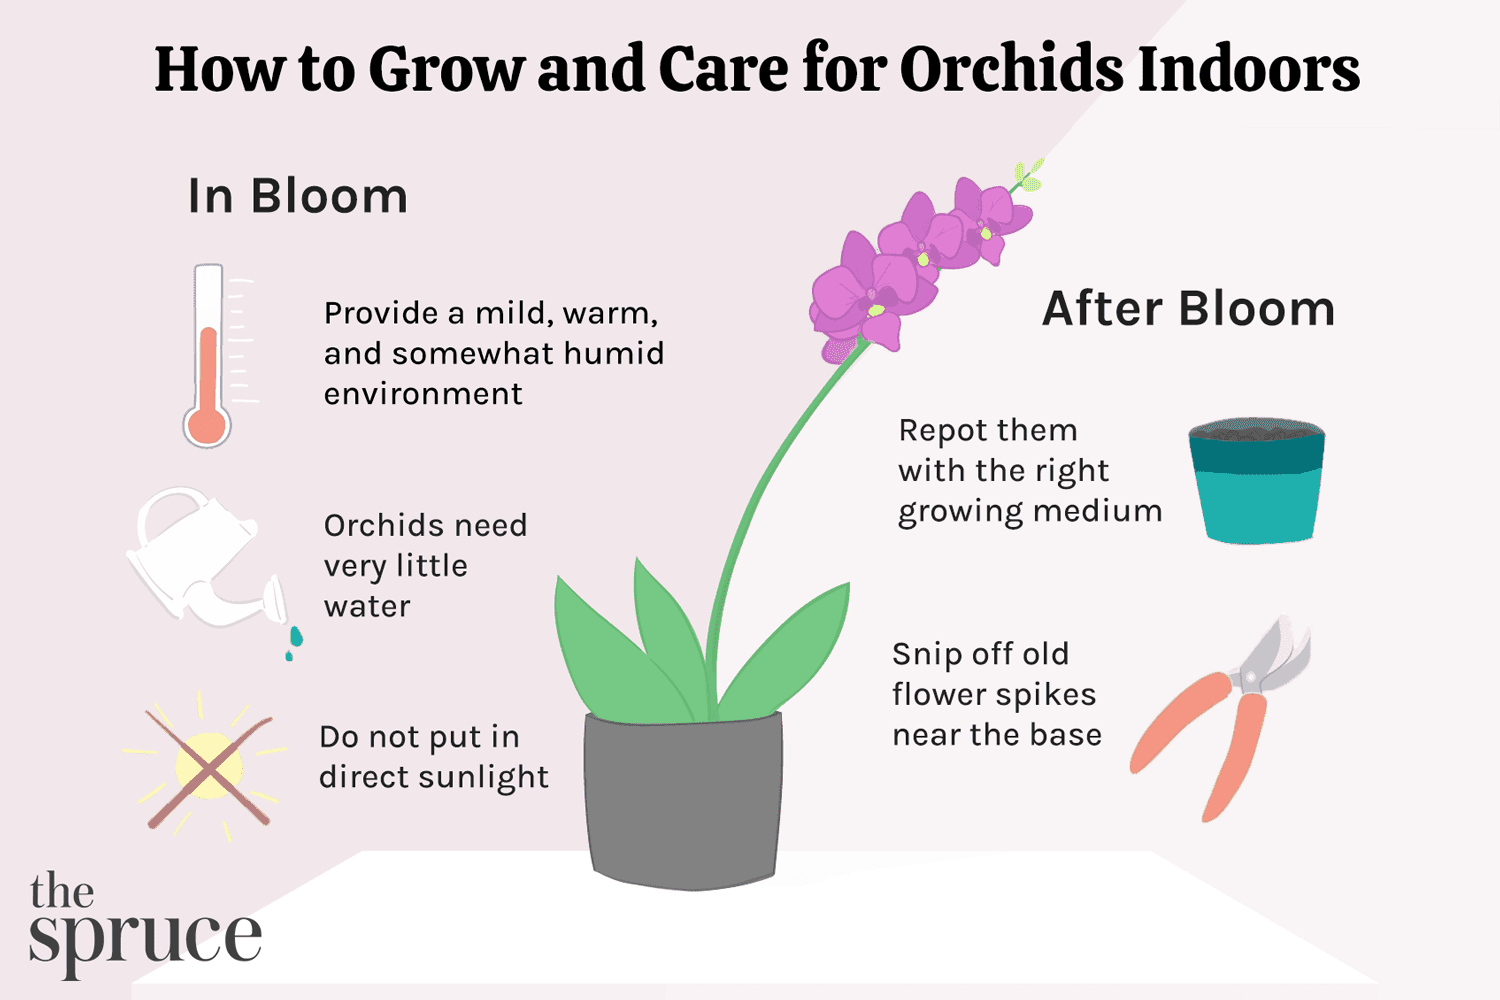 How do you keep orchids blooming